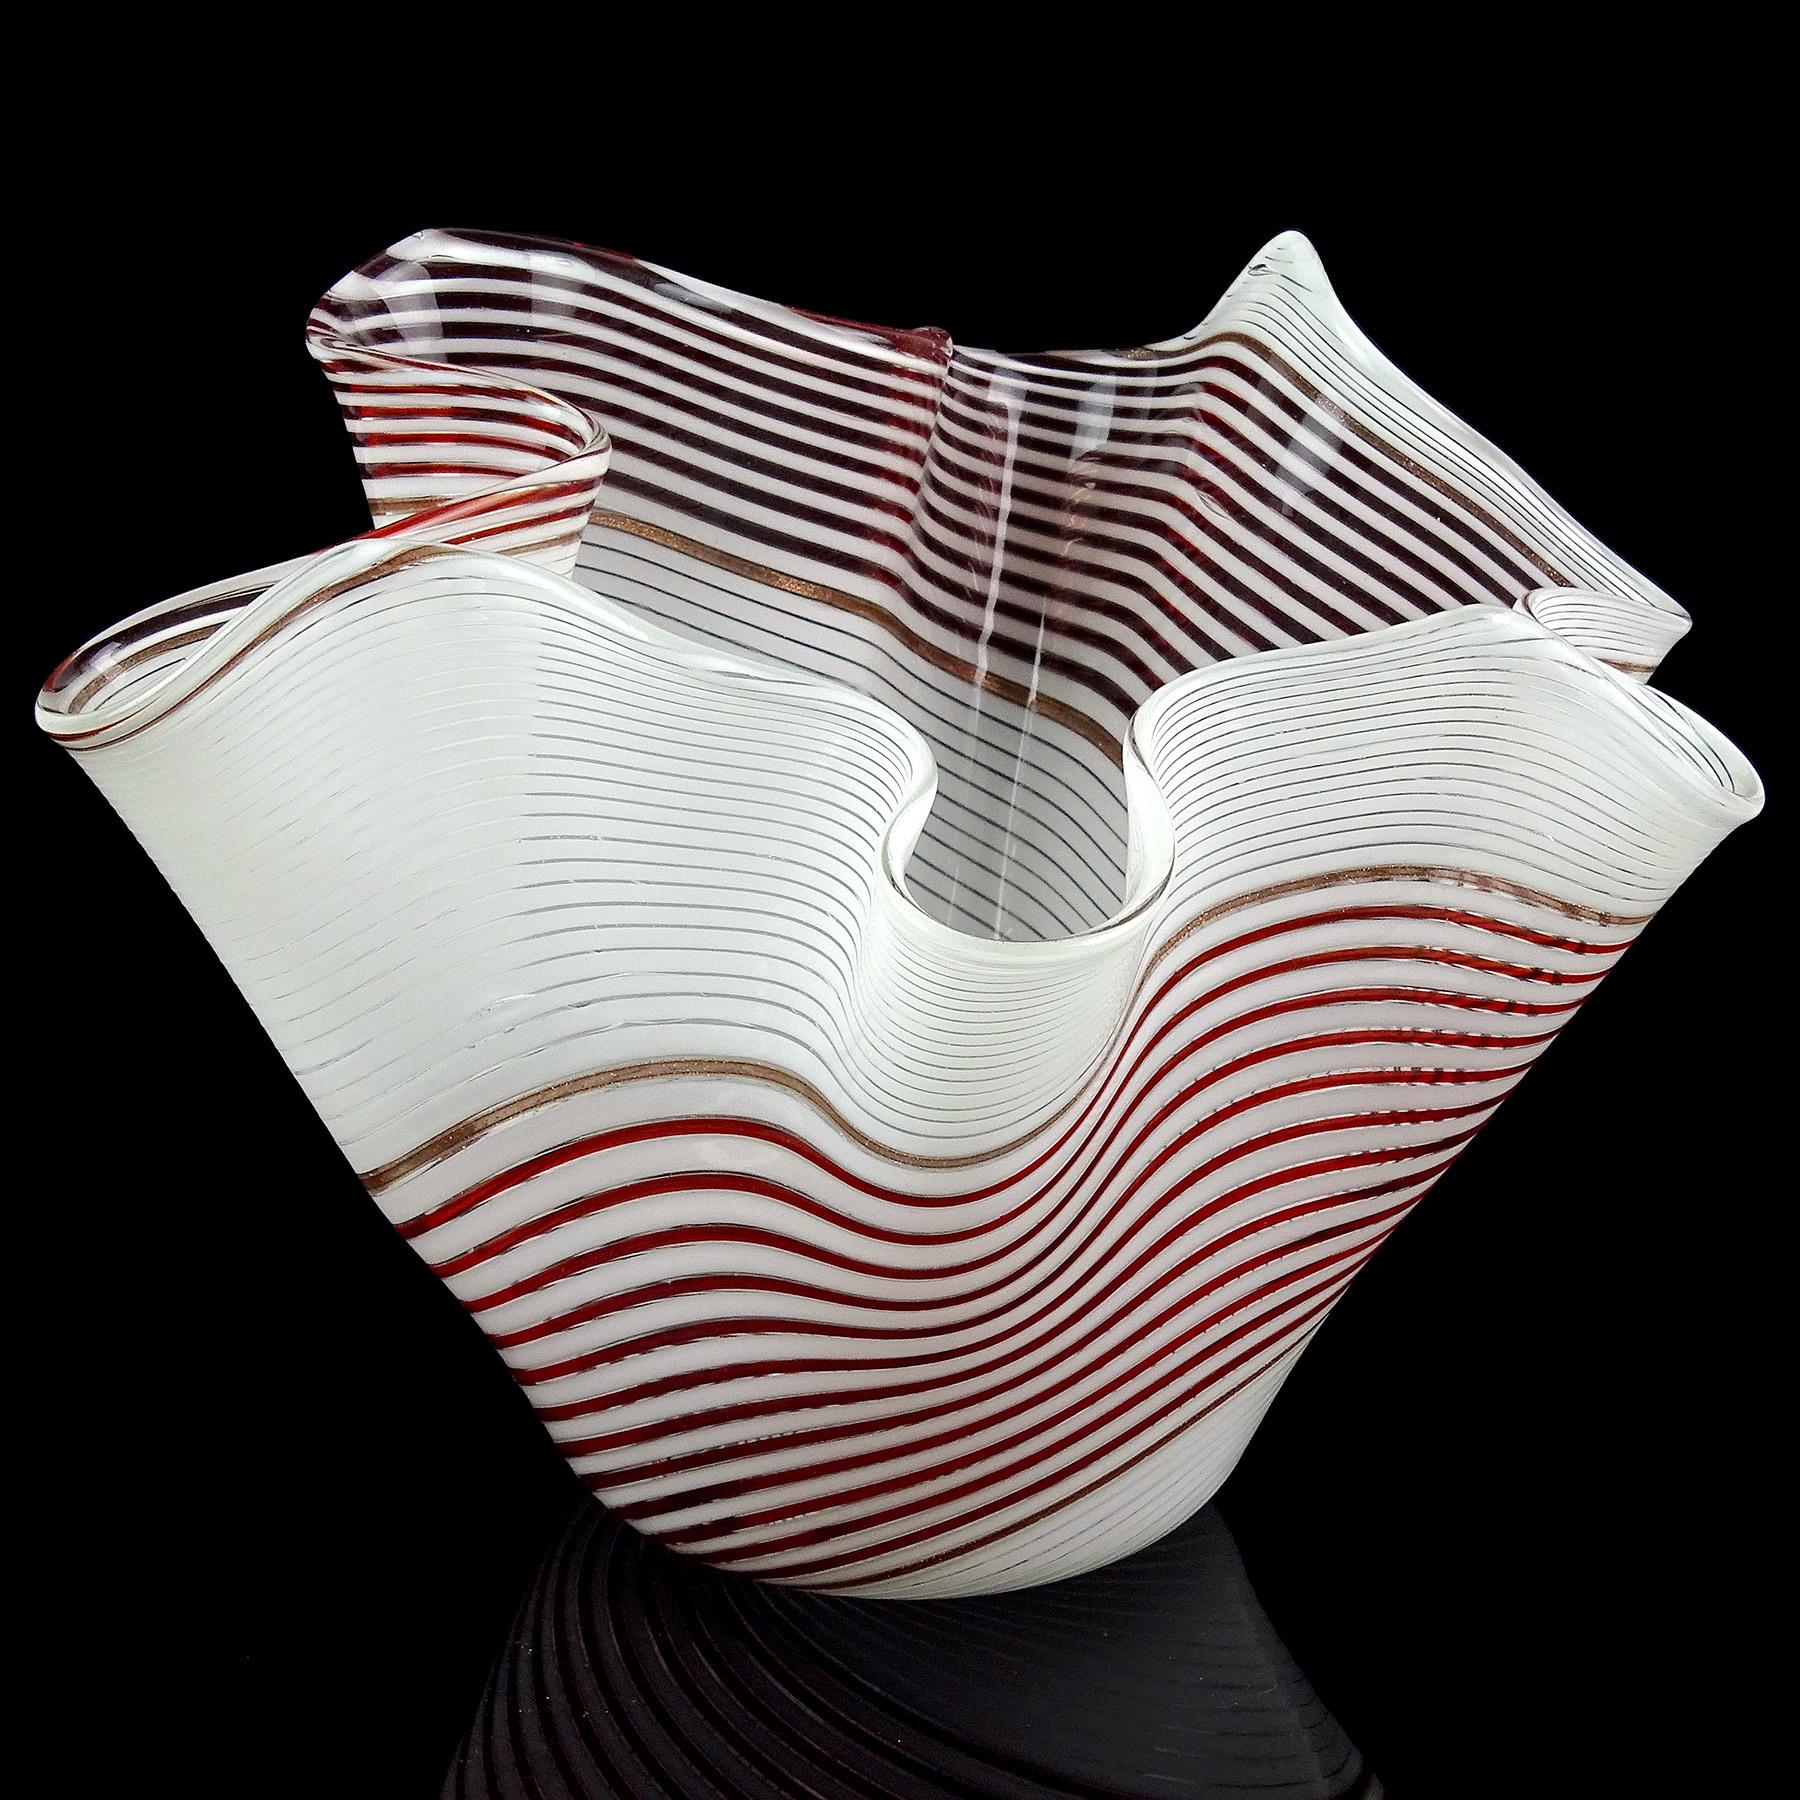 Beautiful vintage Murano hand blown red and white ribbons Italian art glass decorative fazzoletto / handkerchief flower vase. Documented to master designer Dino Martens for the Aureliano Toso workshop circa 1950s. Published design in many books and